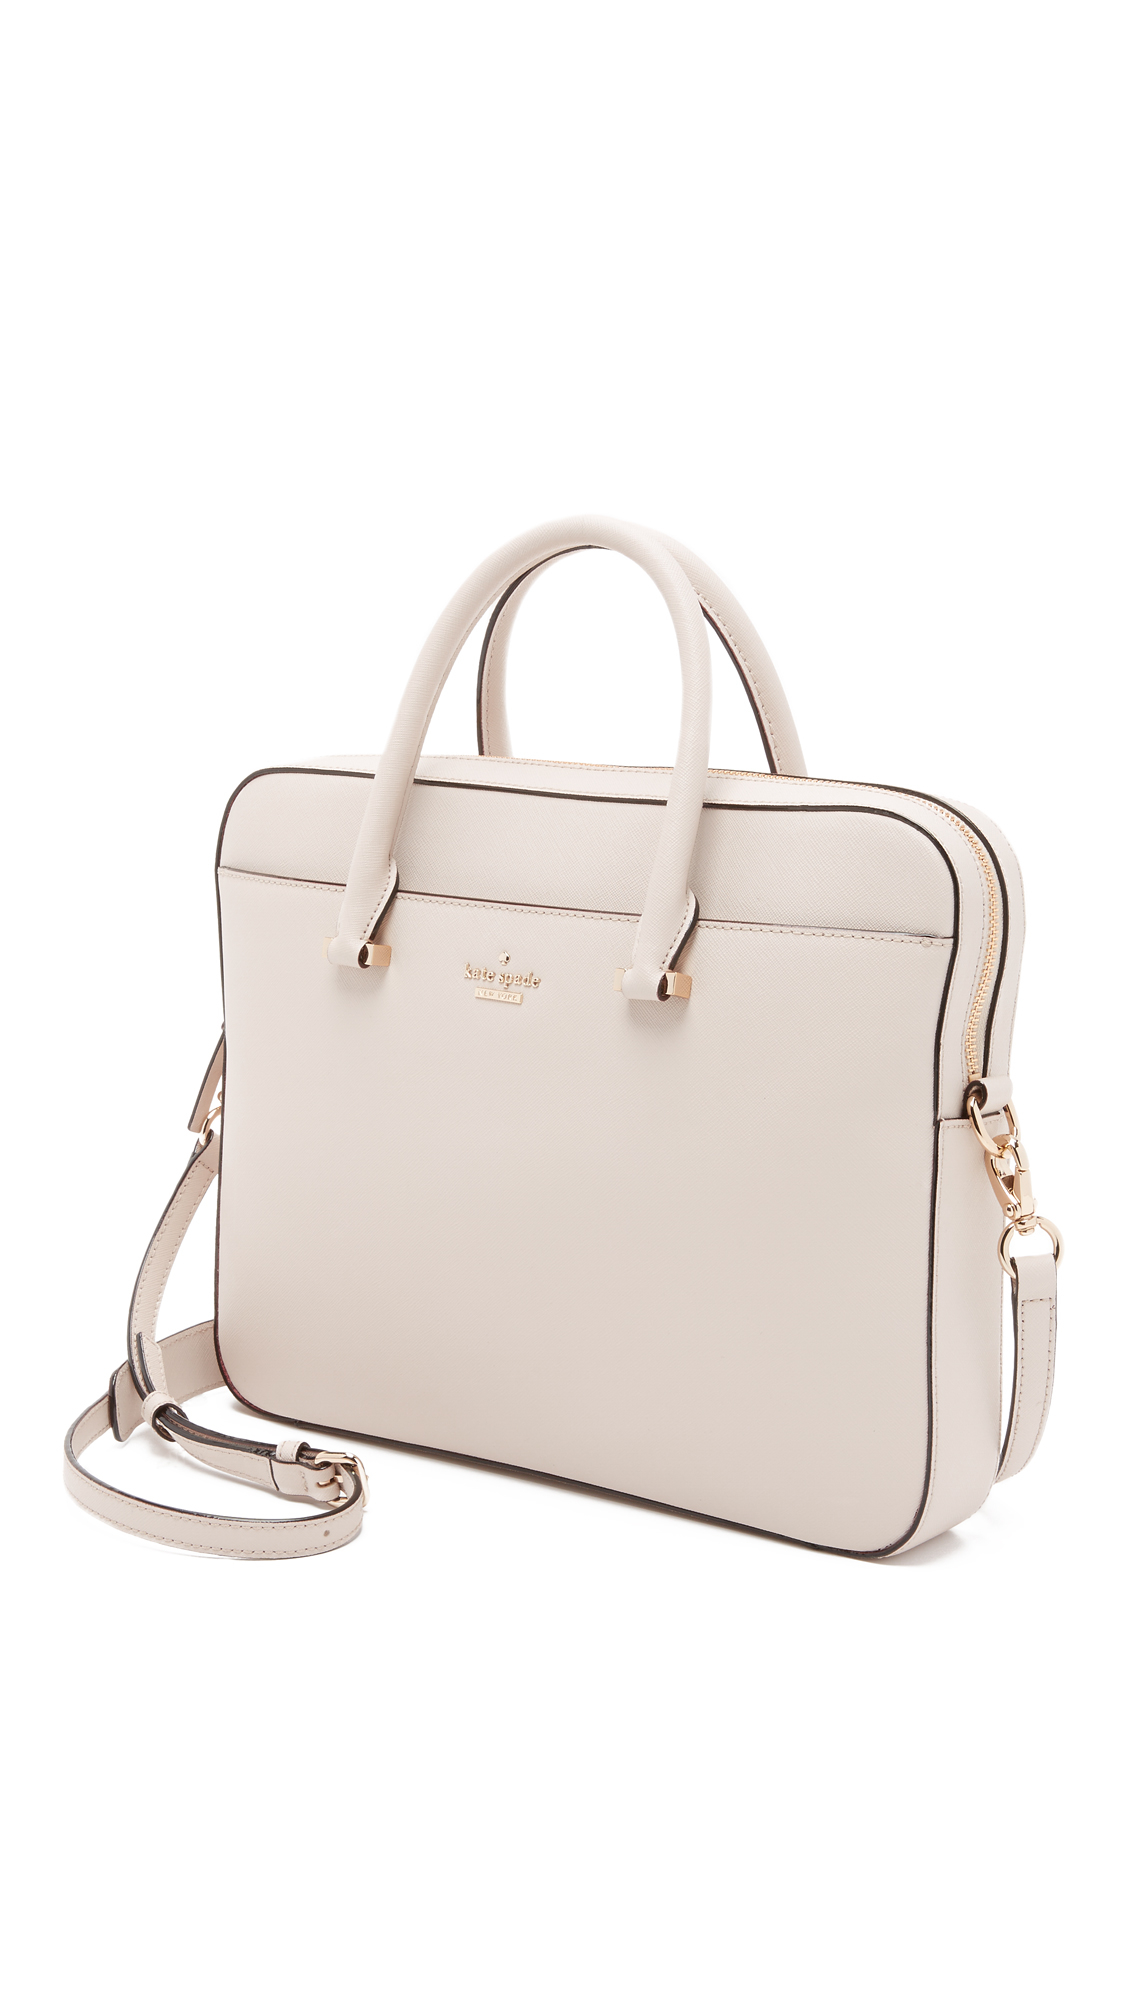 Kate Spade 13 Inch Saffiano Laptop Bag In Natural Lyst, 55% OFF